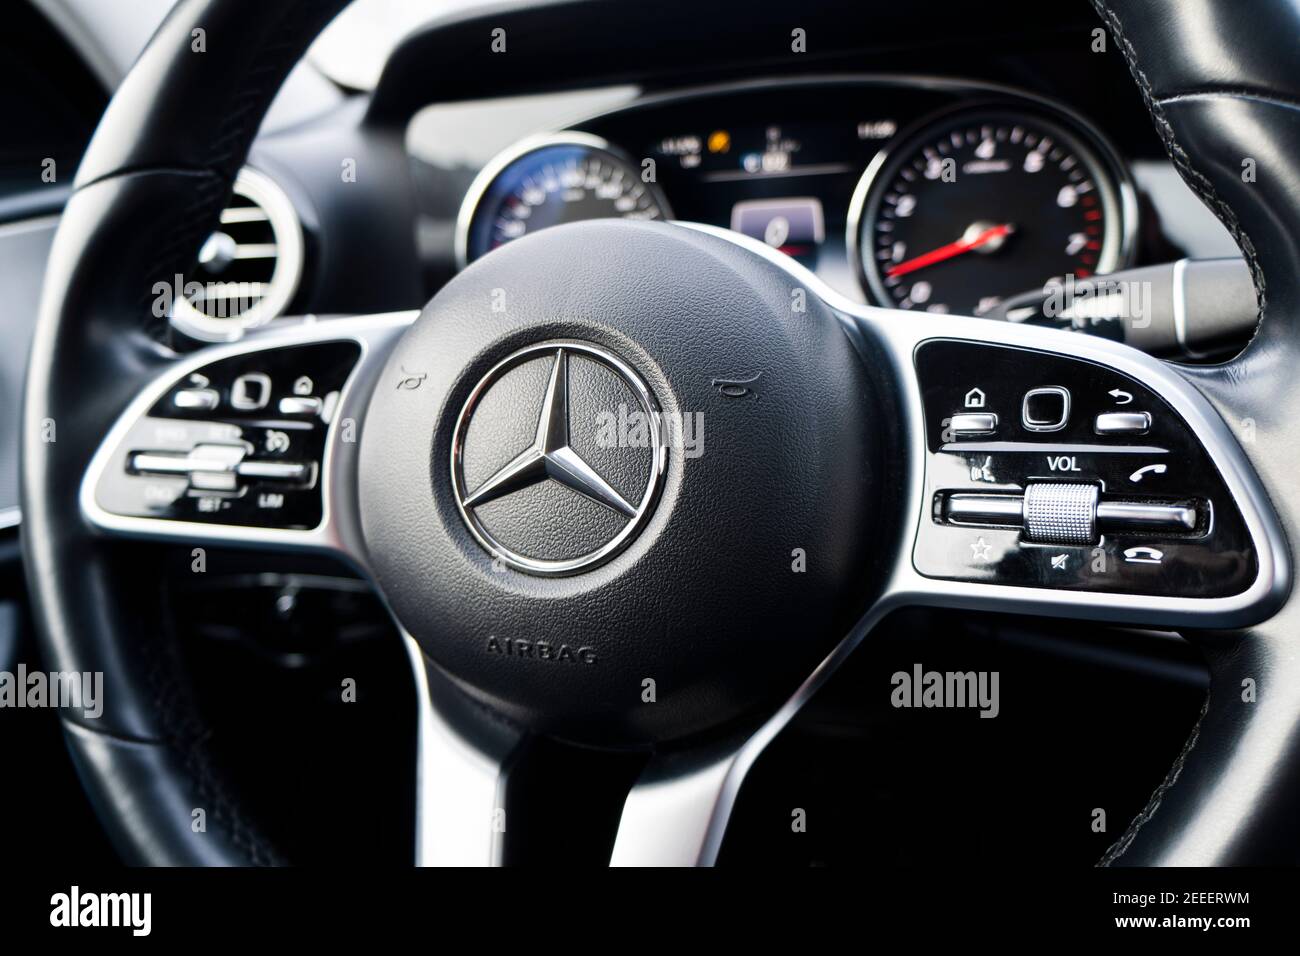 Sankt-Petersburg, Russia, February 10, 2021: Dashboard and steering wheel with media control buttons of a Mercedes Benz E-class . Car interior details Stock Photo